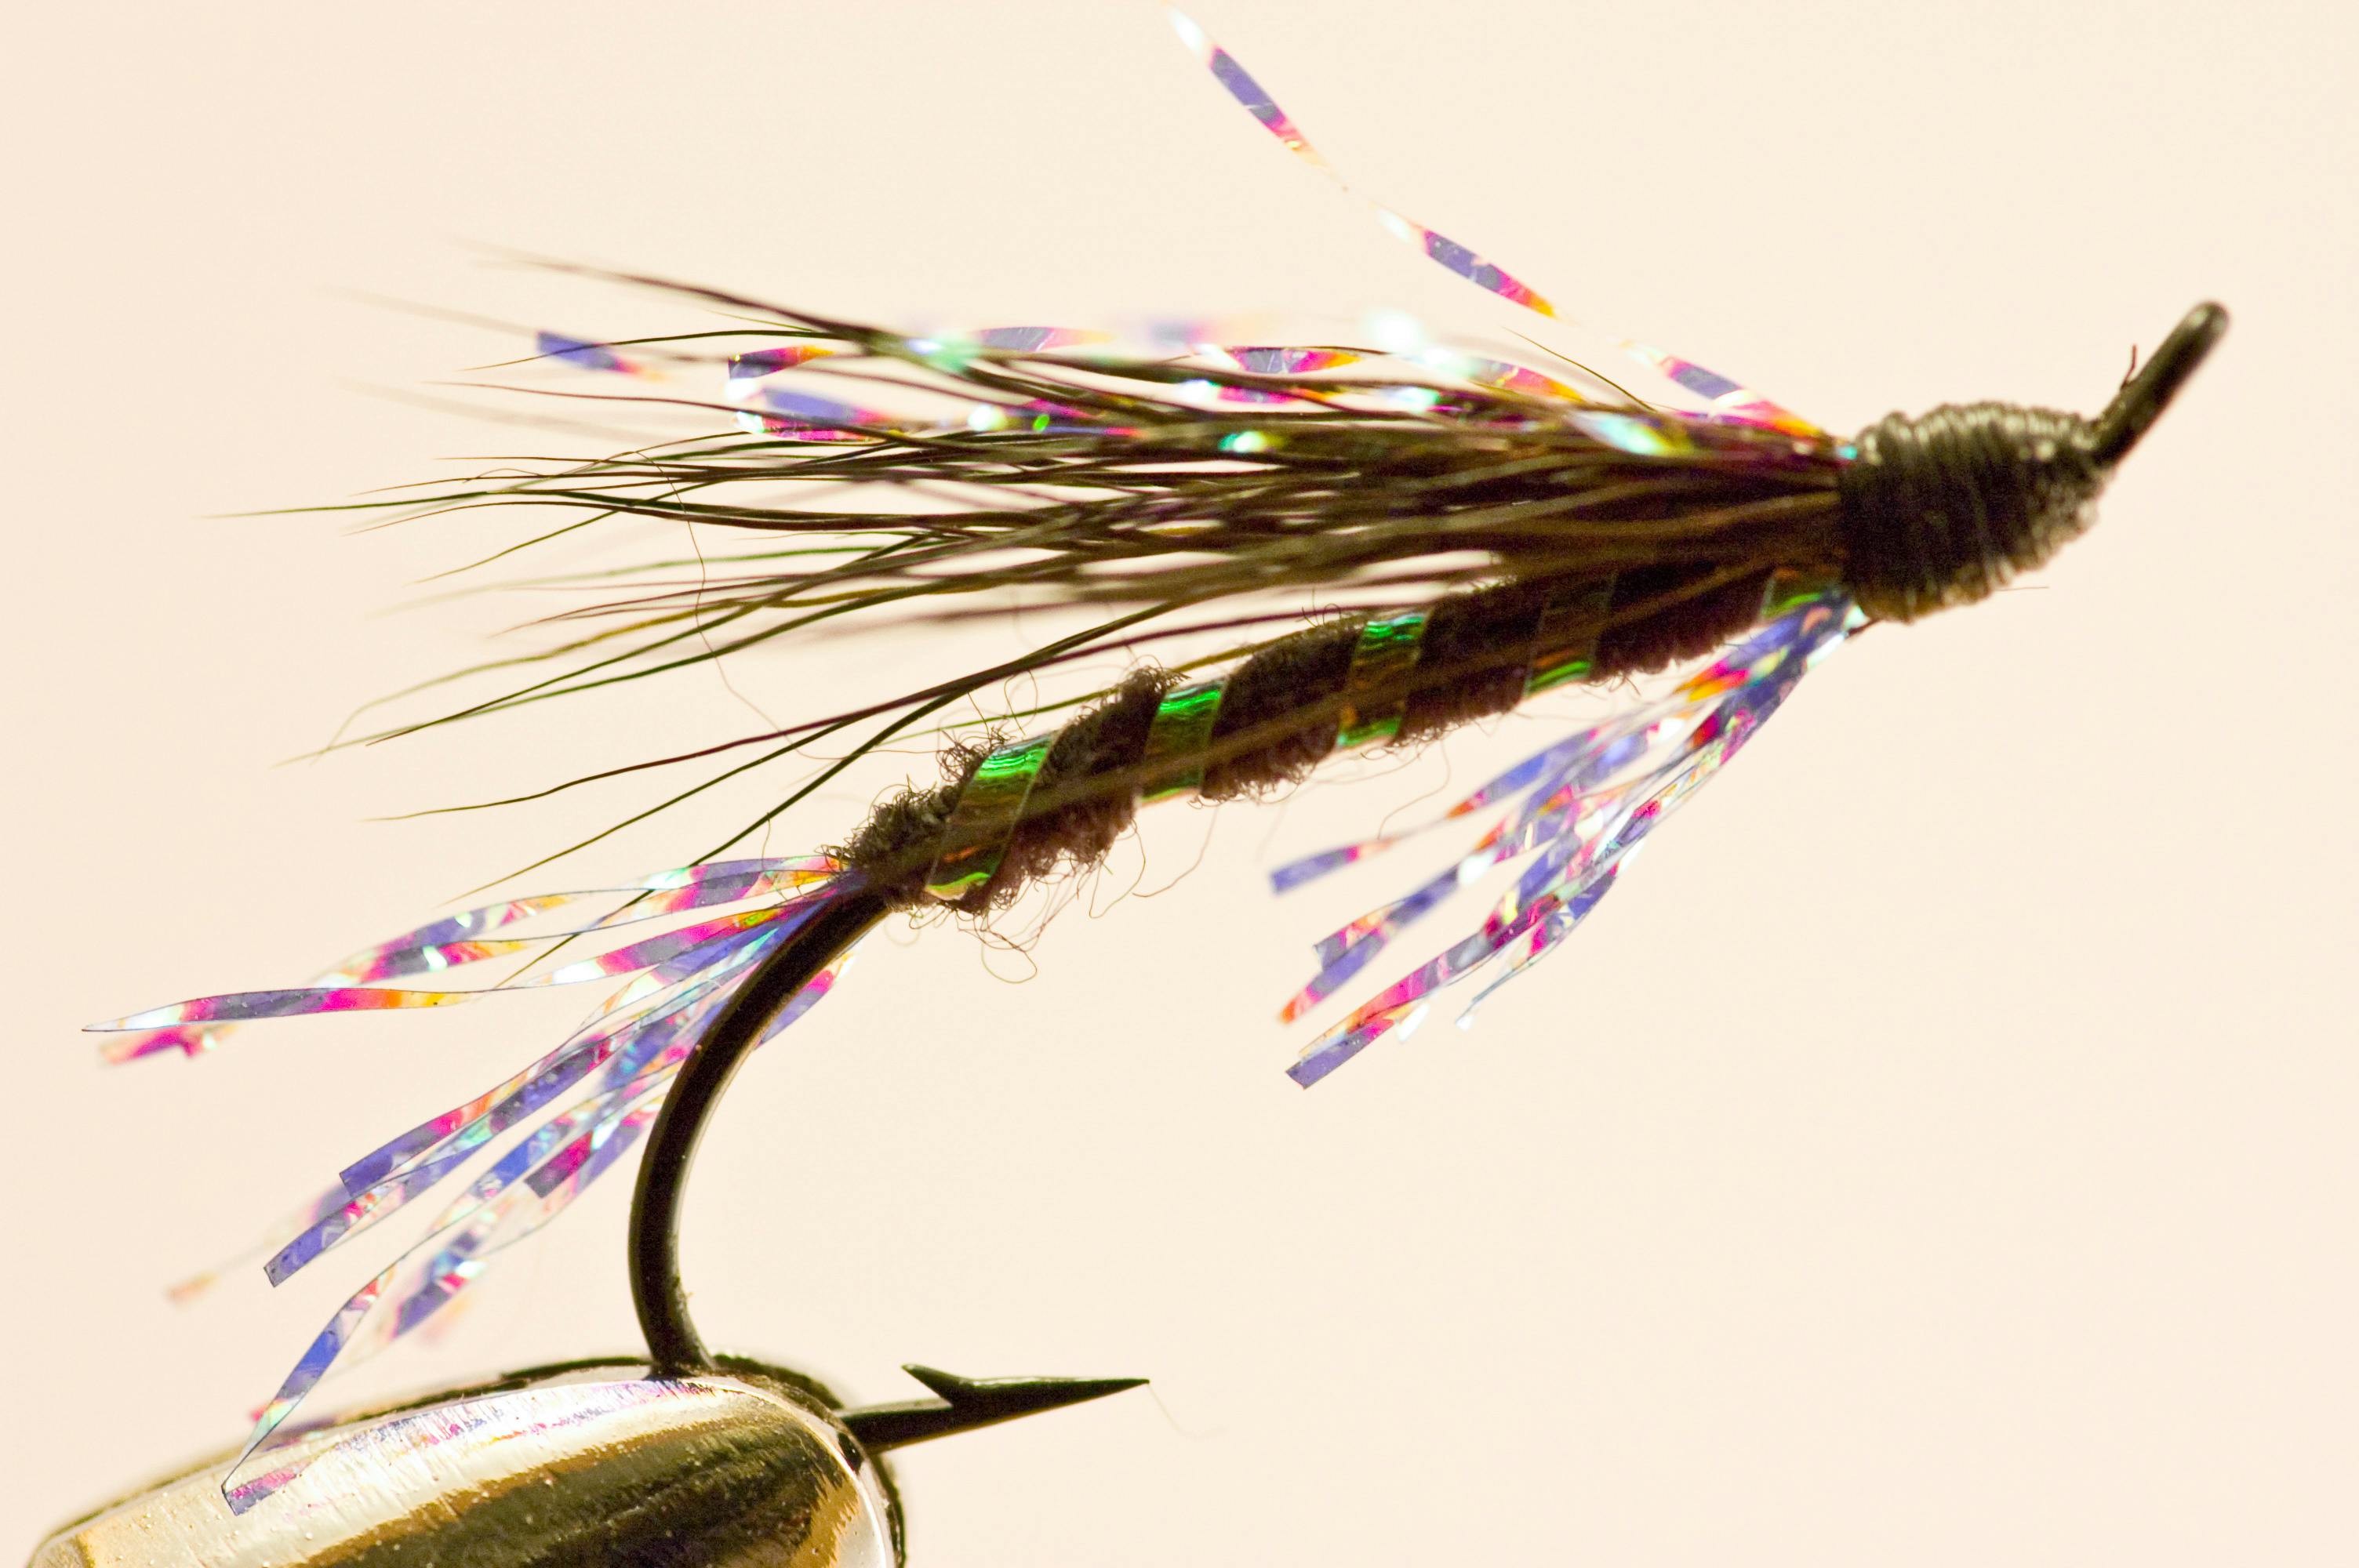 Silver Doctor SIngle Salmon Flies For Fly Fishing 3 Per Pack Choice of Sizes